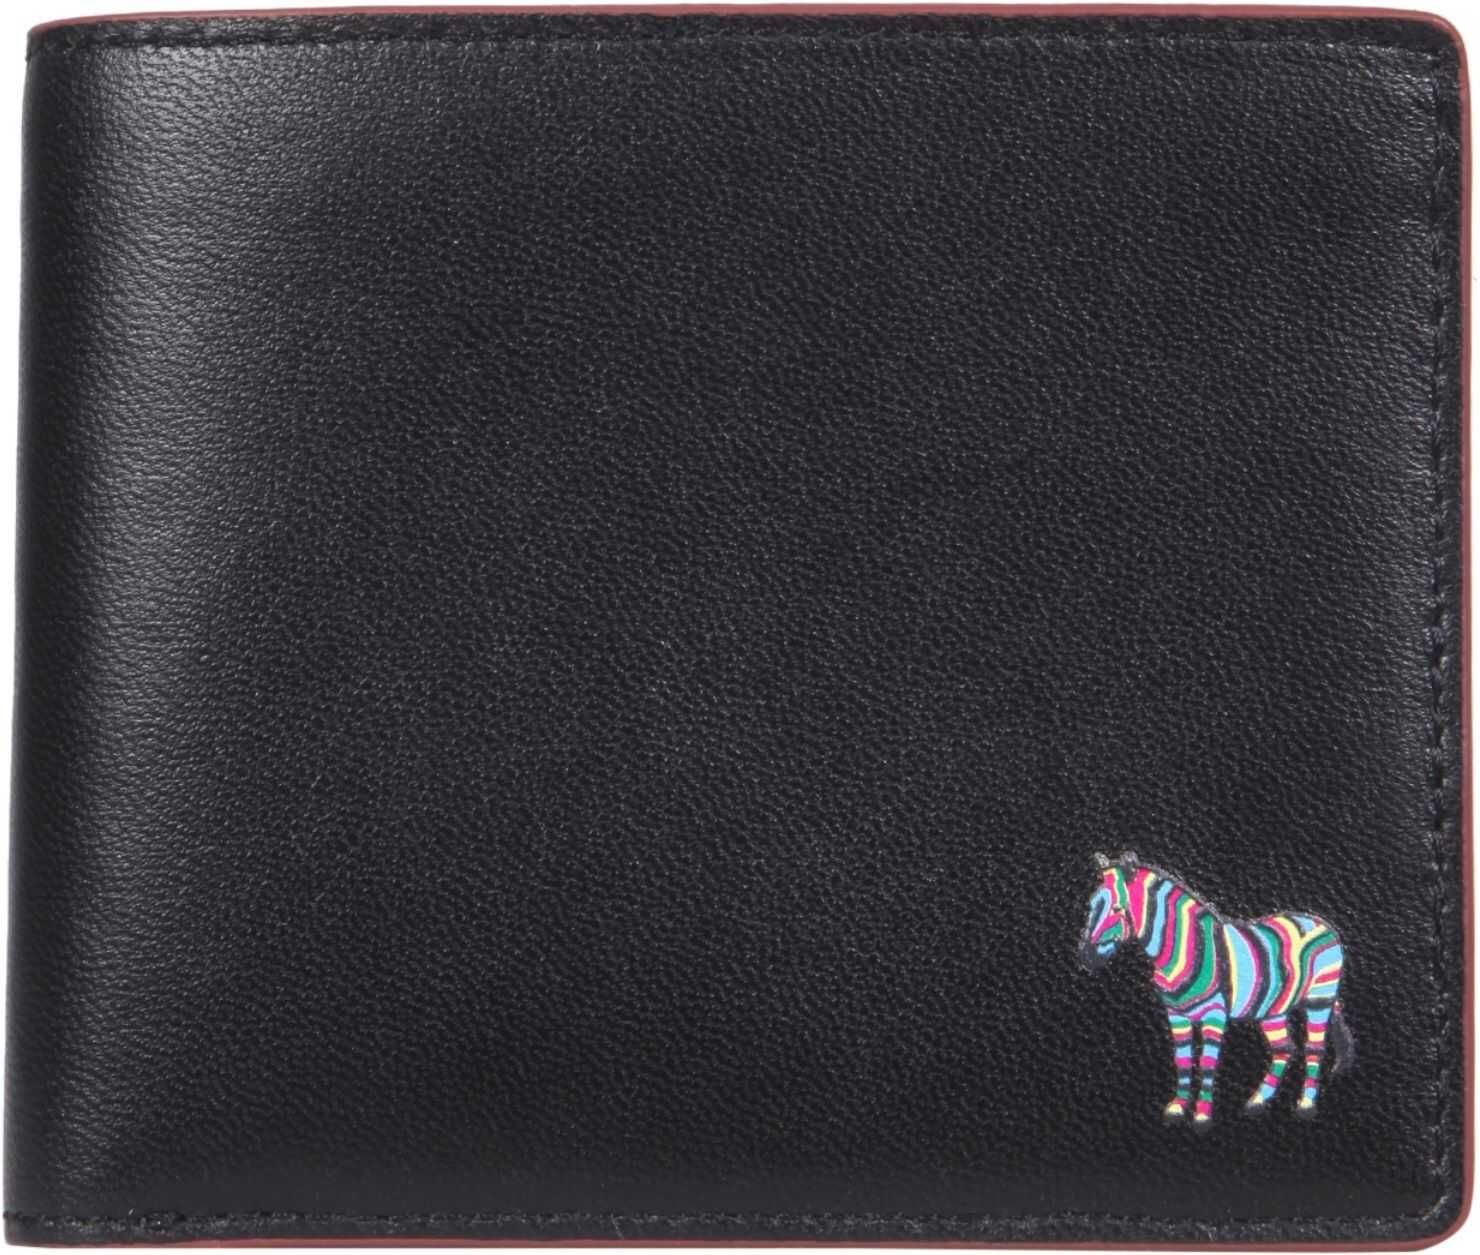 PS by Paul Smith Leather Bifold Wallet M2A/5321/CZEBRA_79 BLACK